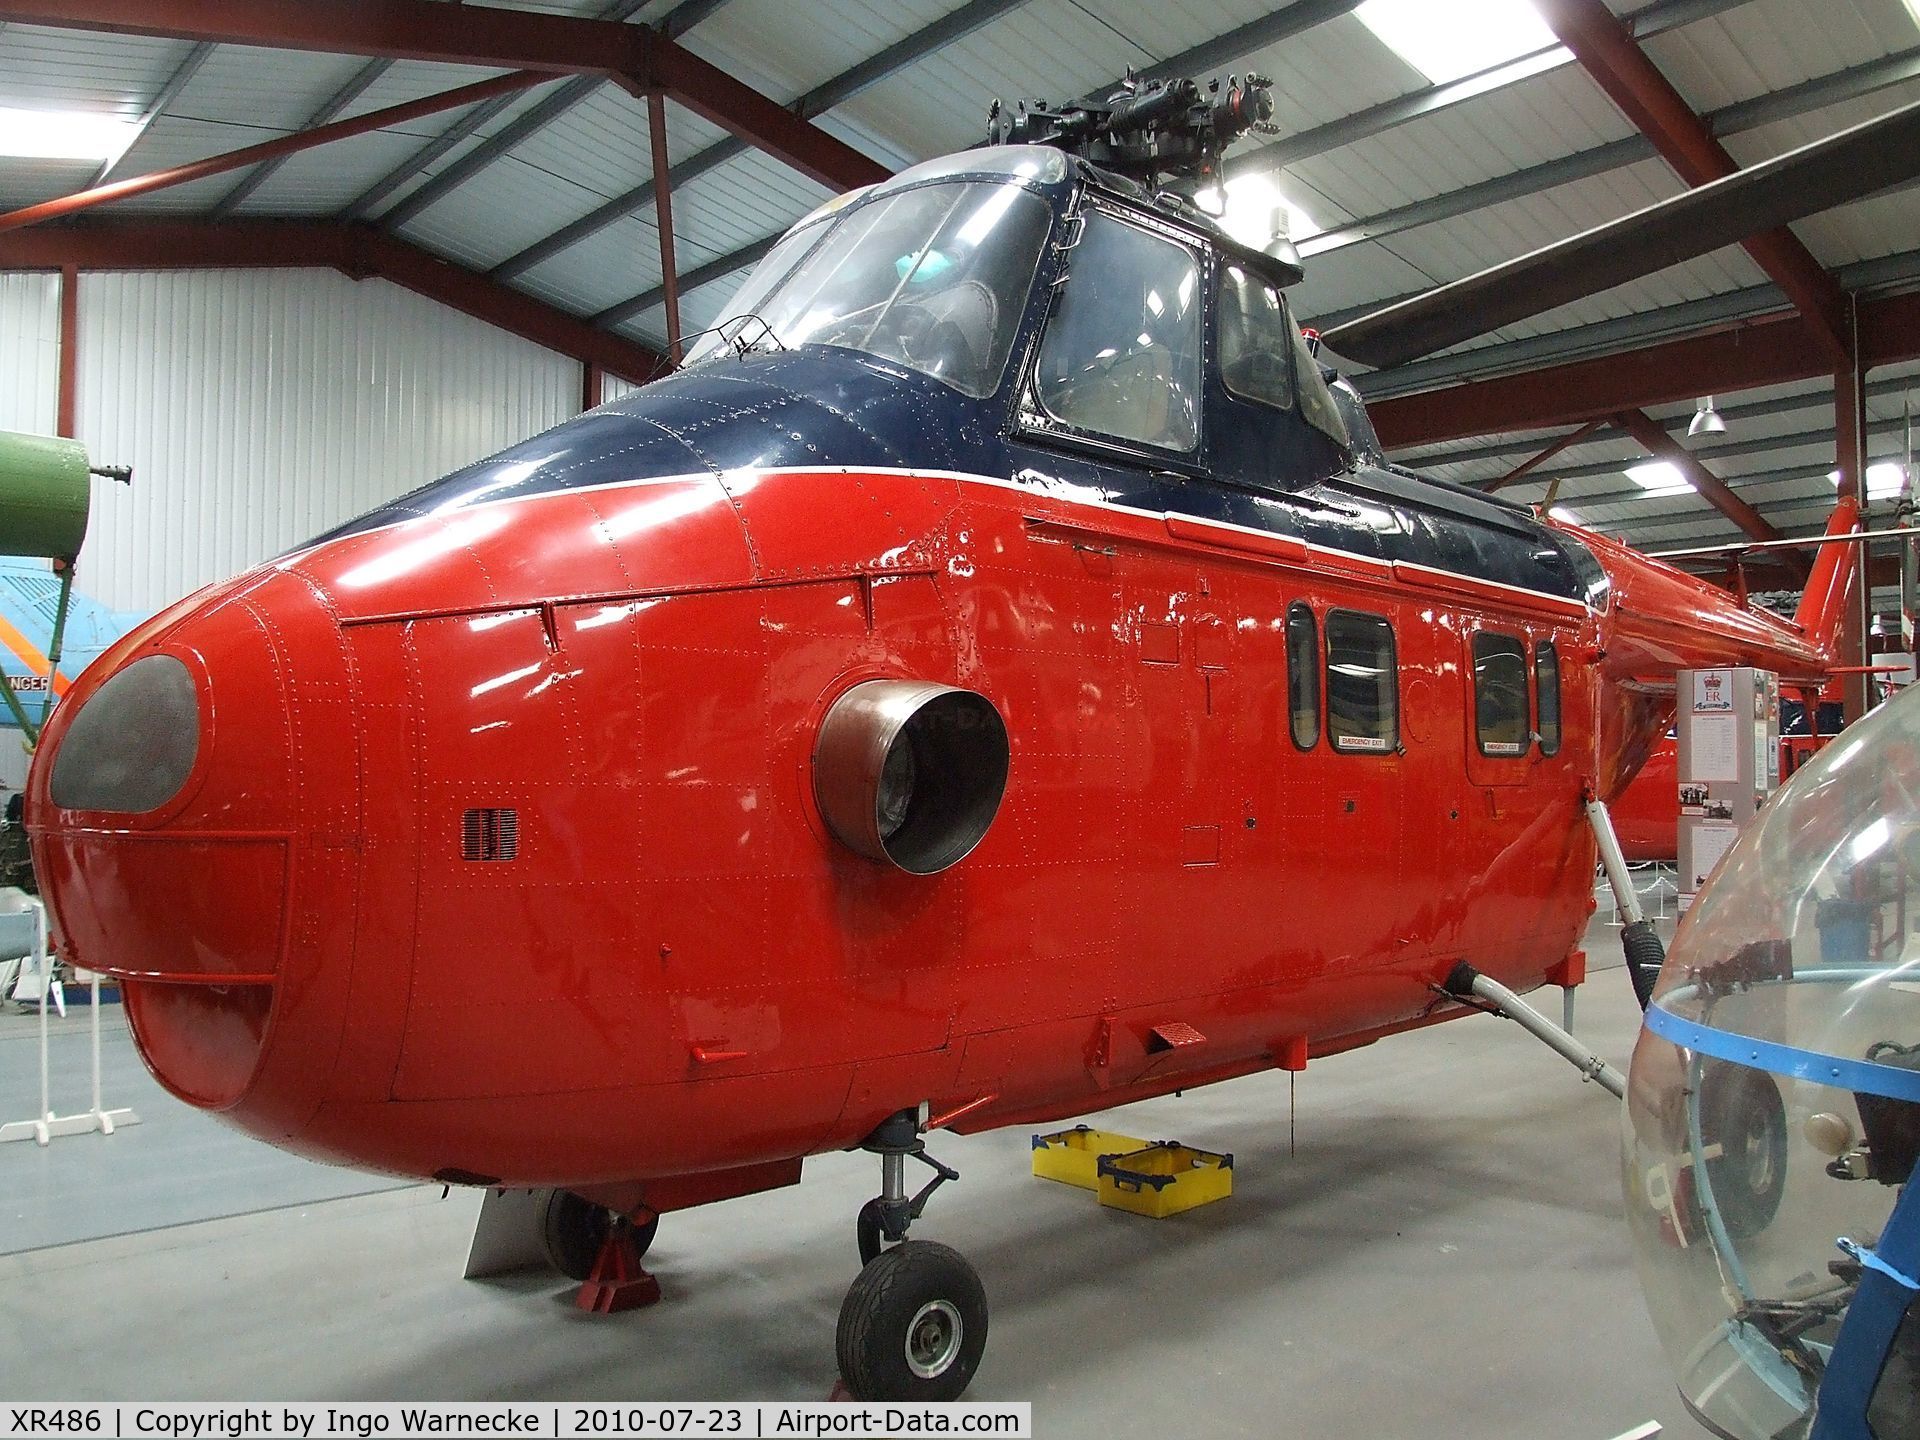 XR486, 1964 Westland Whirlwind HCC.12 C/N WA418, Westland Whirlwind HCC12 at the Helicopter Museum, Weston-super-Mare